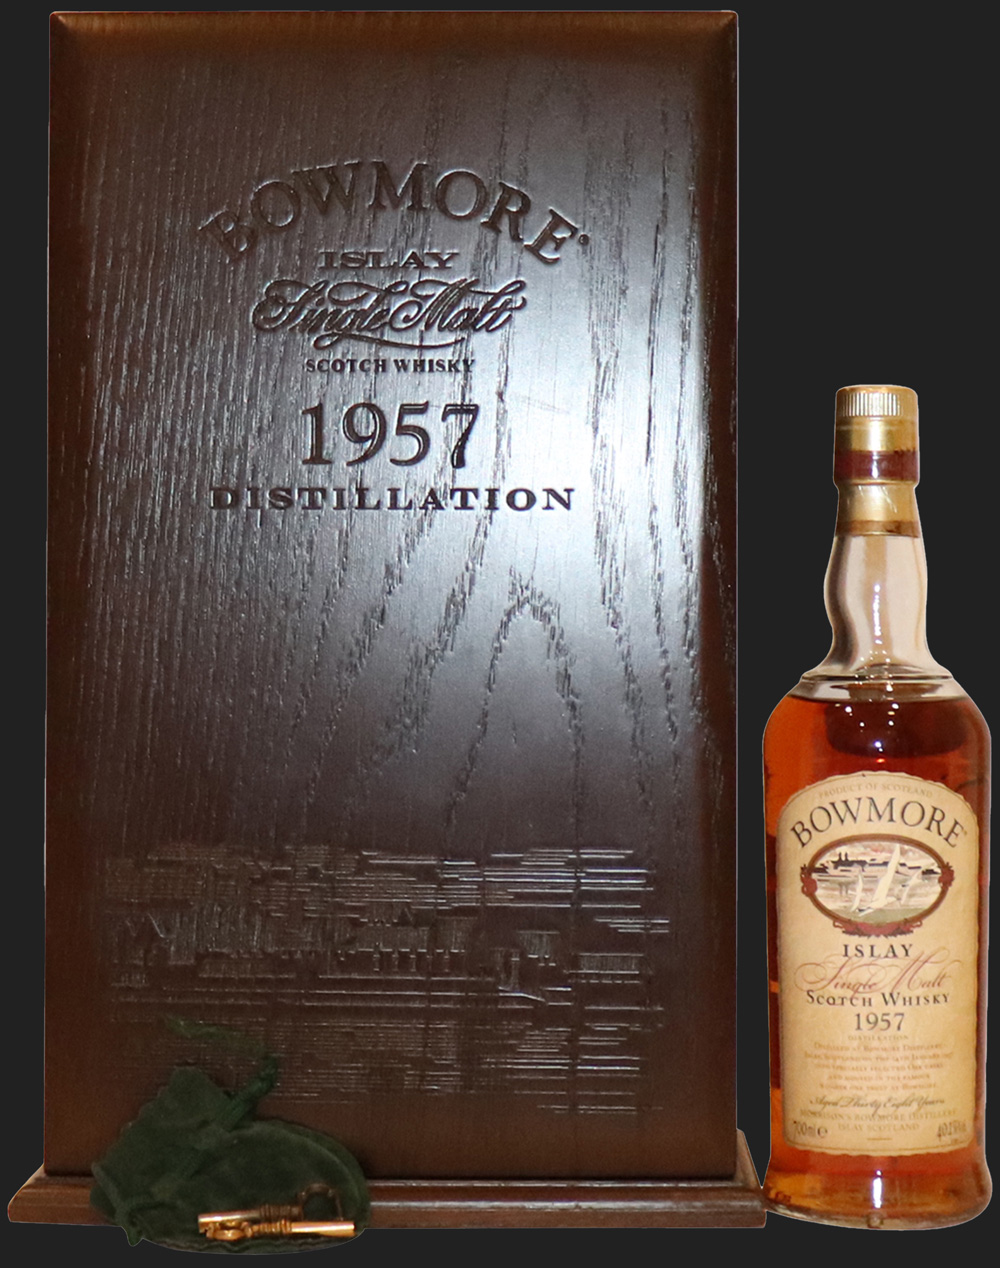 whiskey bottle with original wooden case. 1957 Bowmore Single Malt Scotch Whisky Islay.